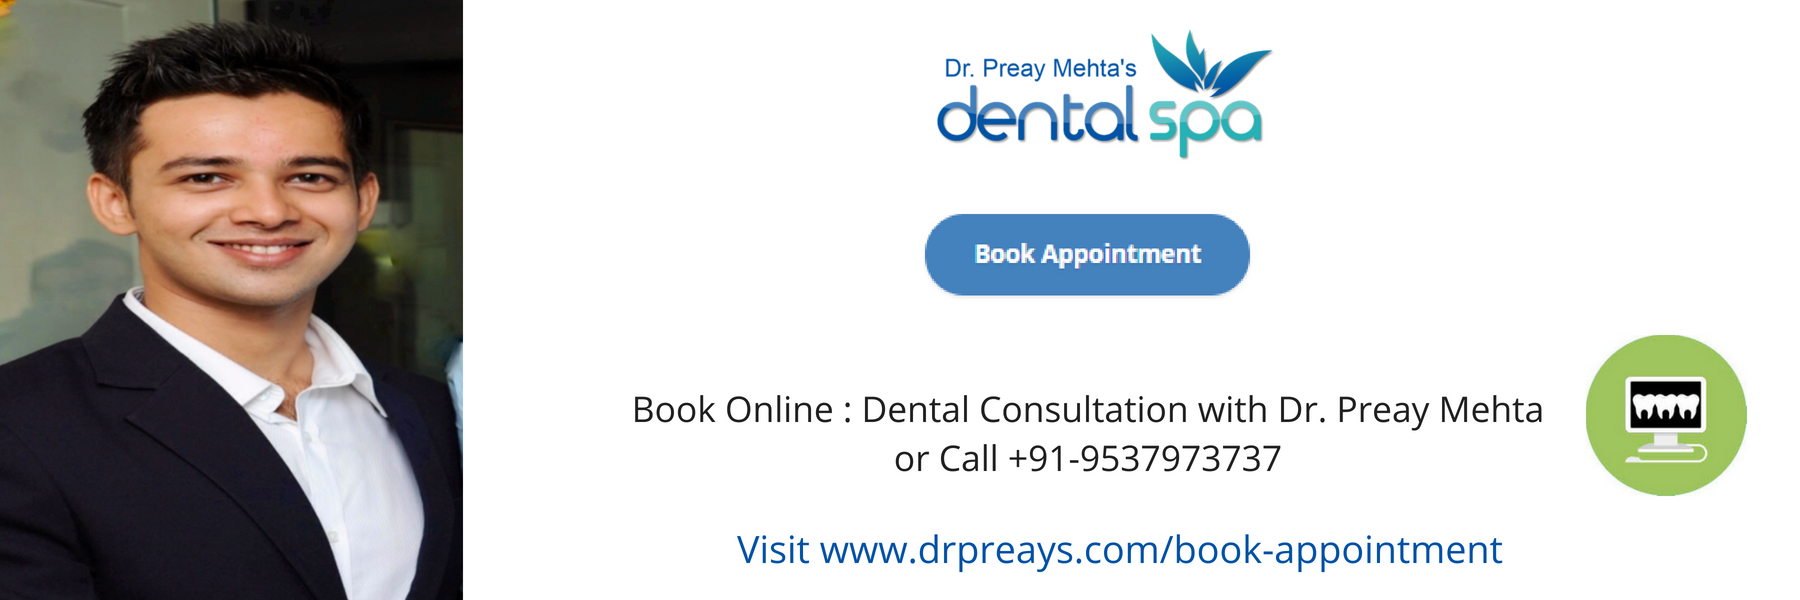 Book-Online-Dental-Consultation-with-Dr.Preay-Mehta